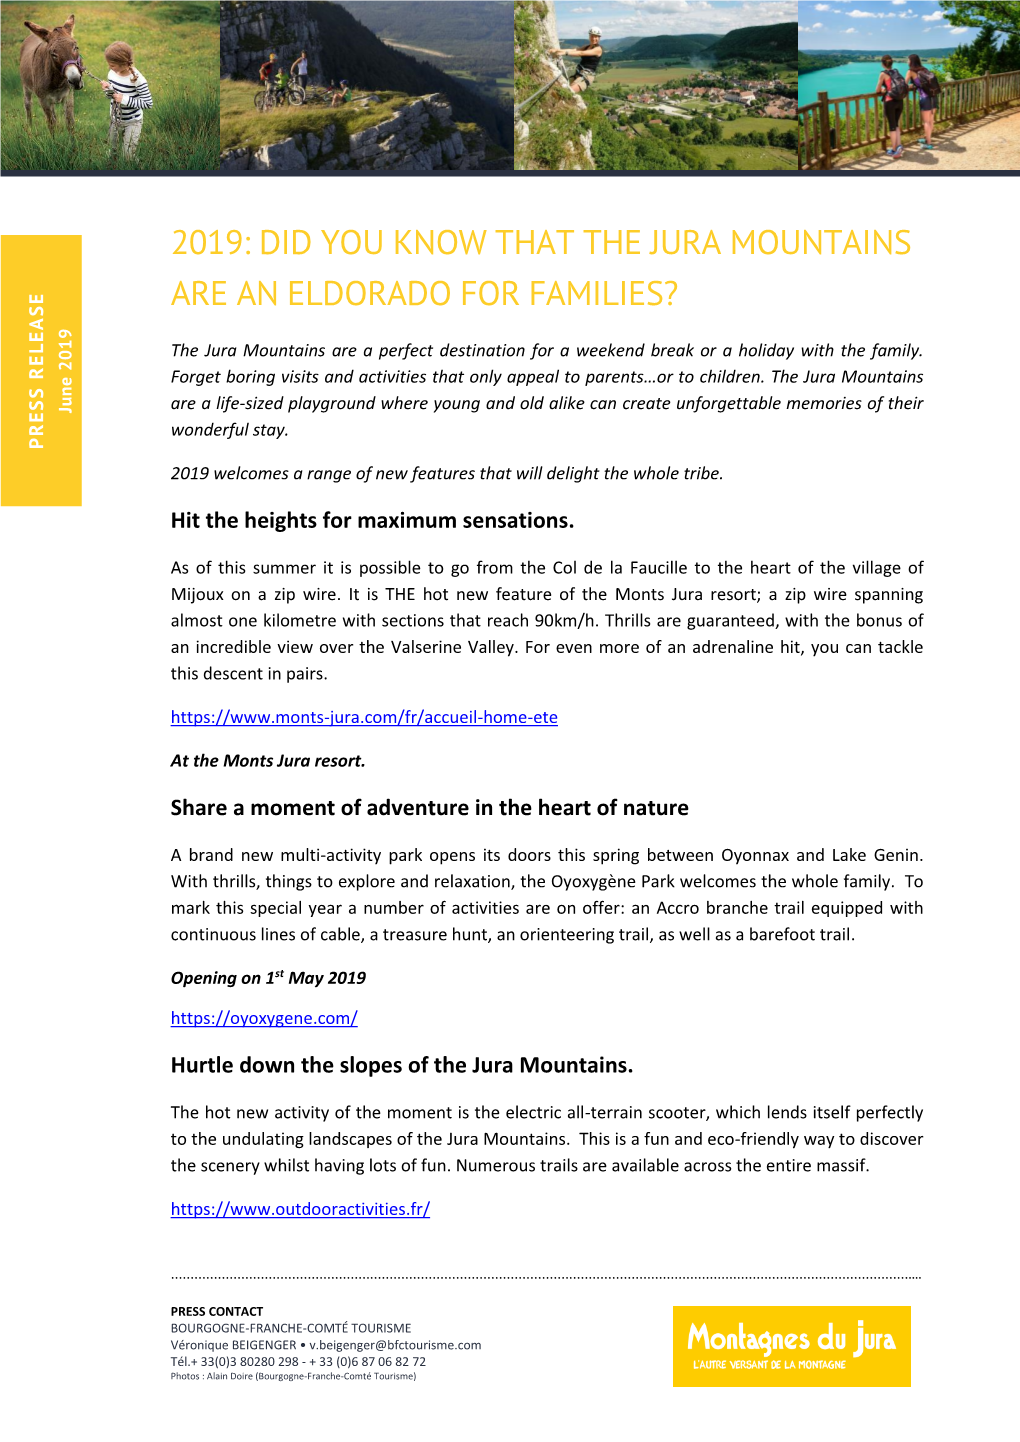 2019: Did You Know That the Jura Mountains Are an Eldorado for Families?